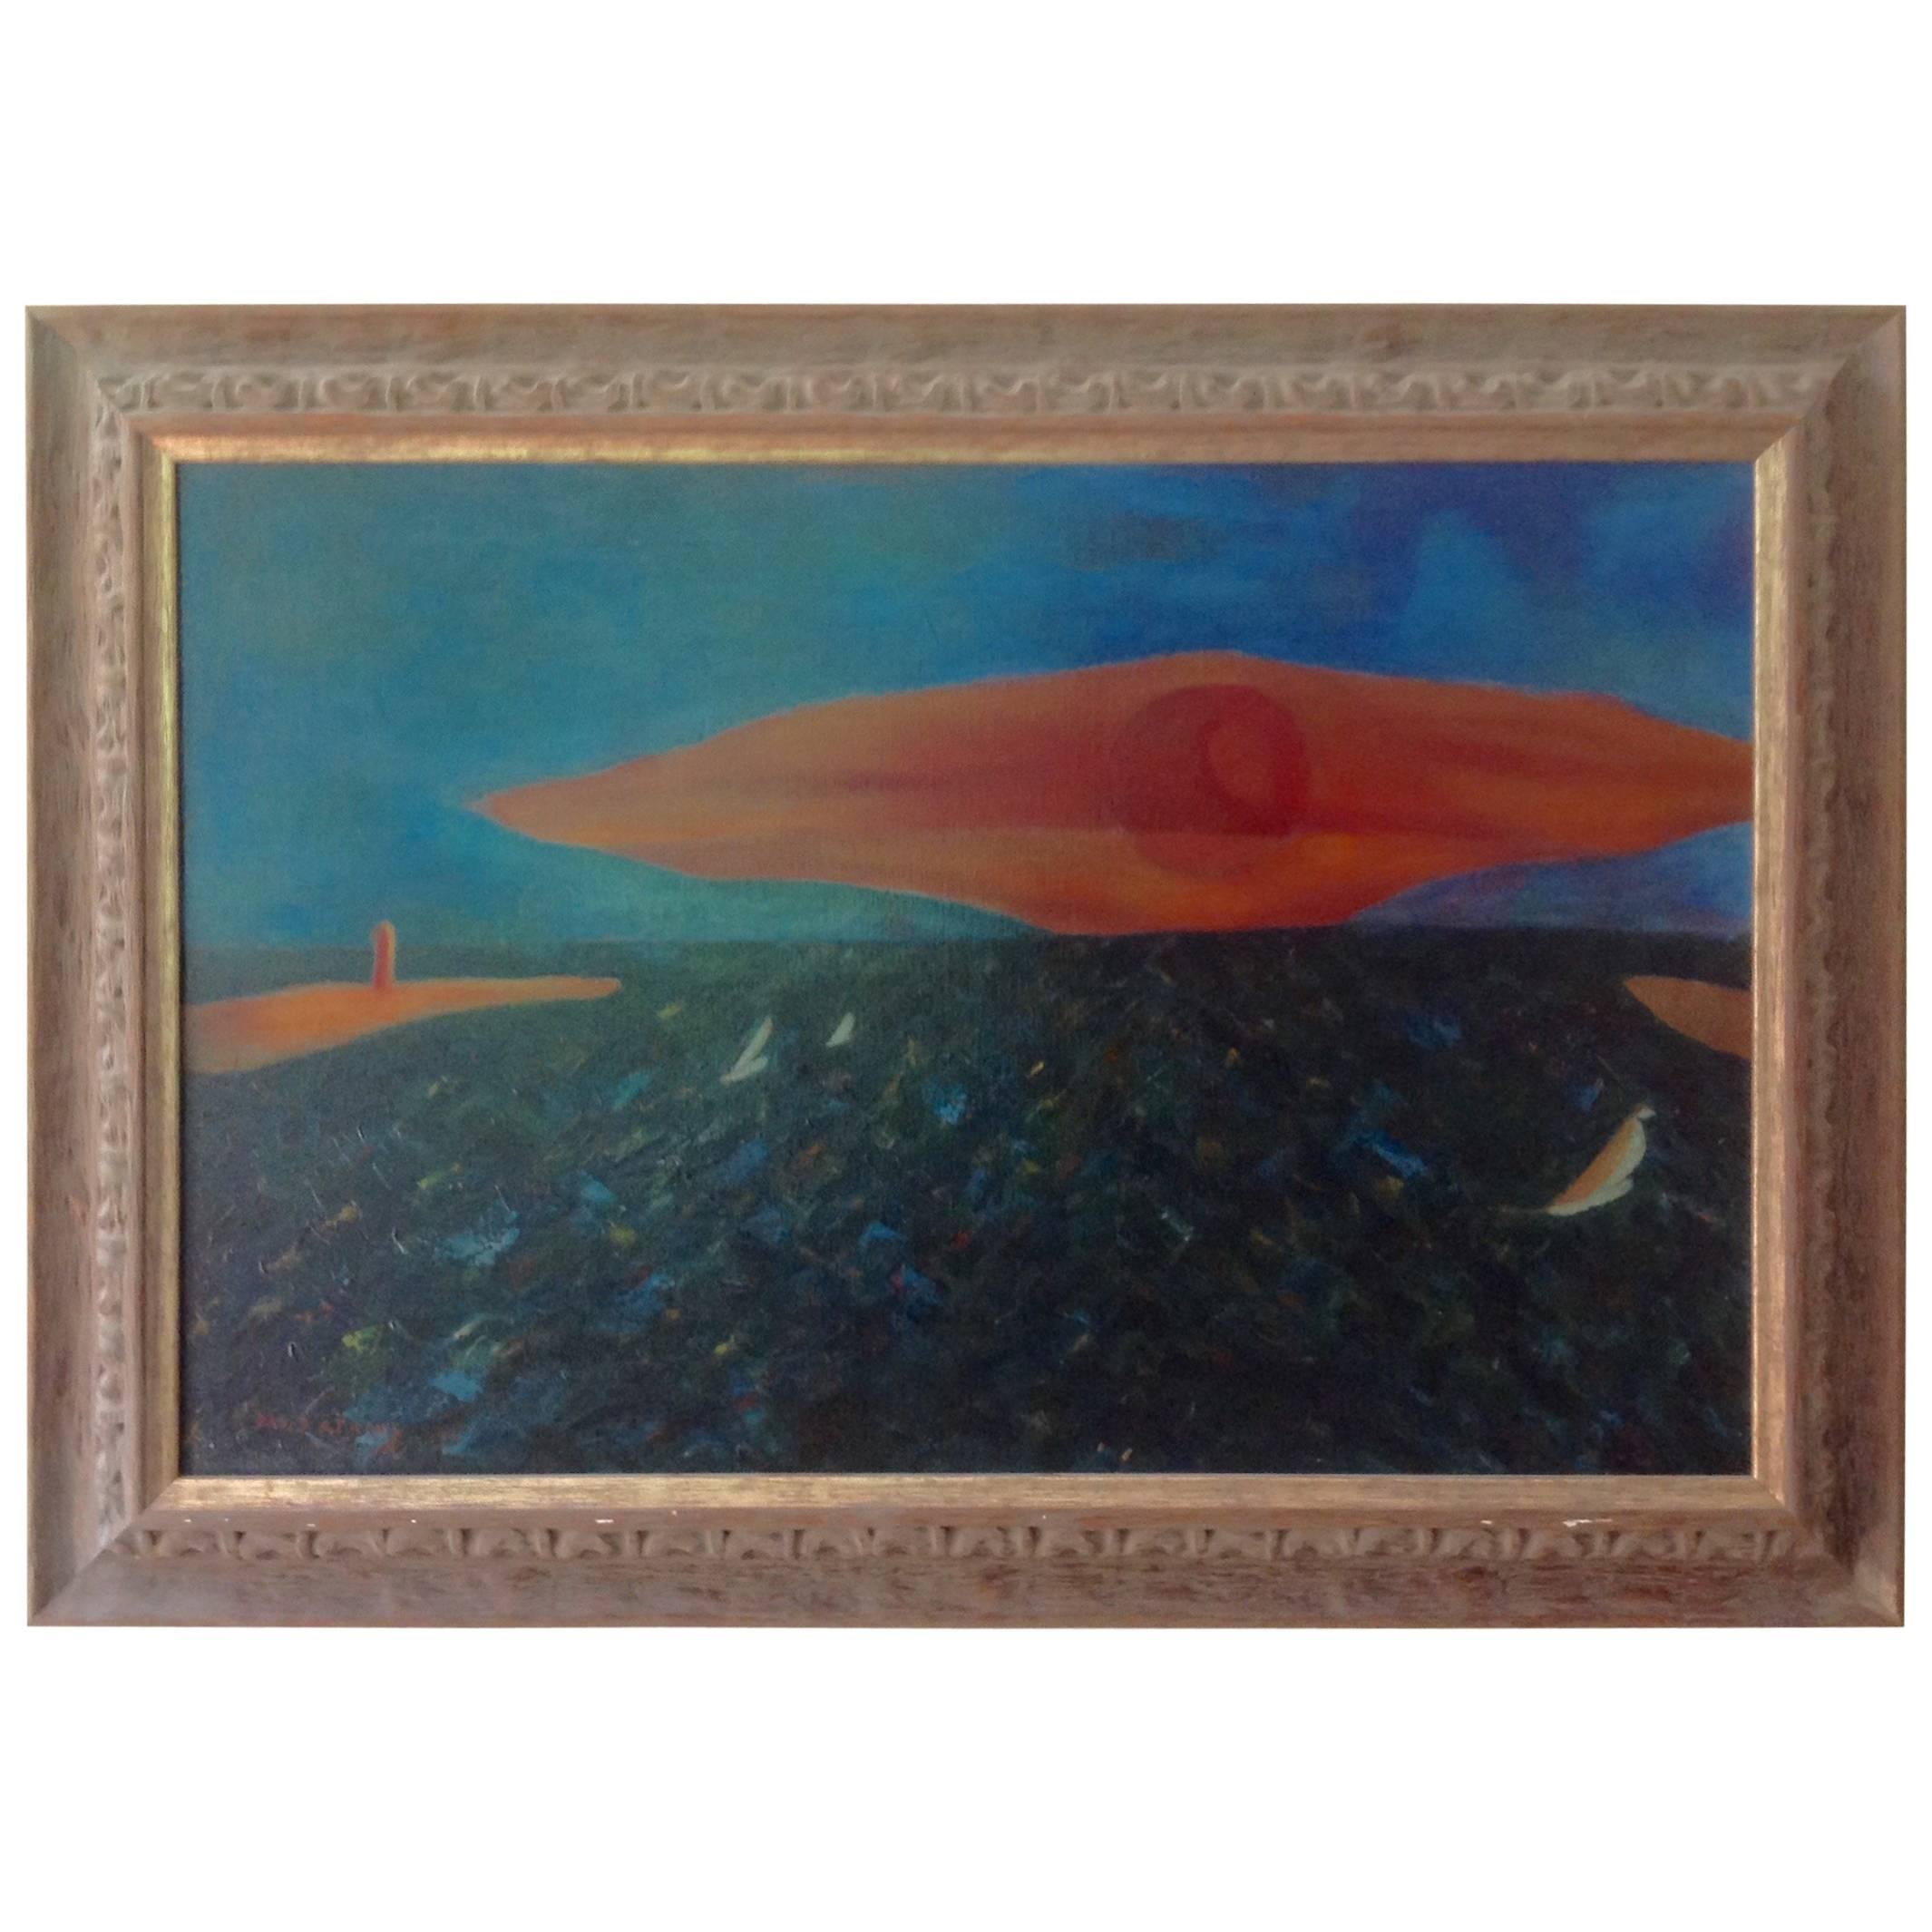 Large Signed David Atkins Surreal Oil on Canvas New York Artist Title "Sunset" For Sale